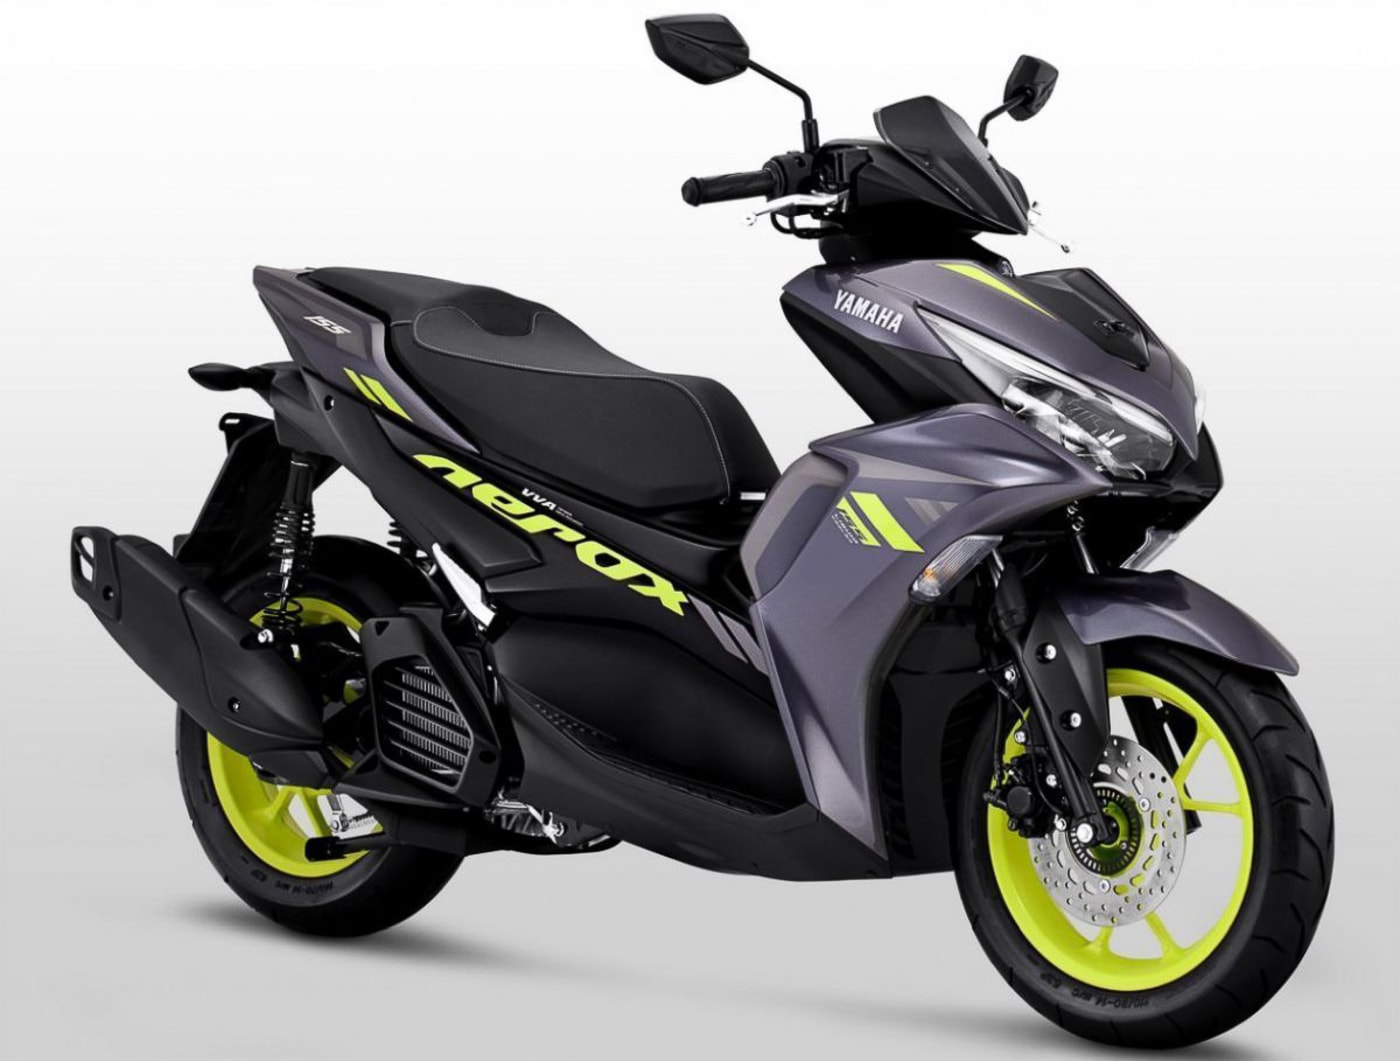 Yamaha R15 based Aerox 155 Scooter Launched Details